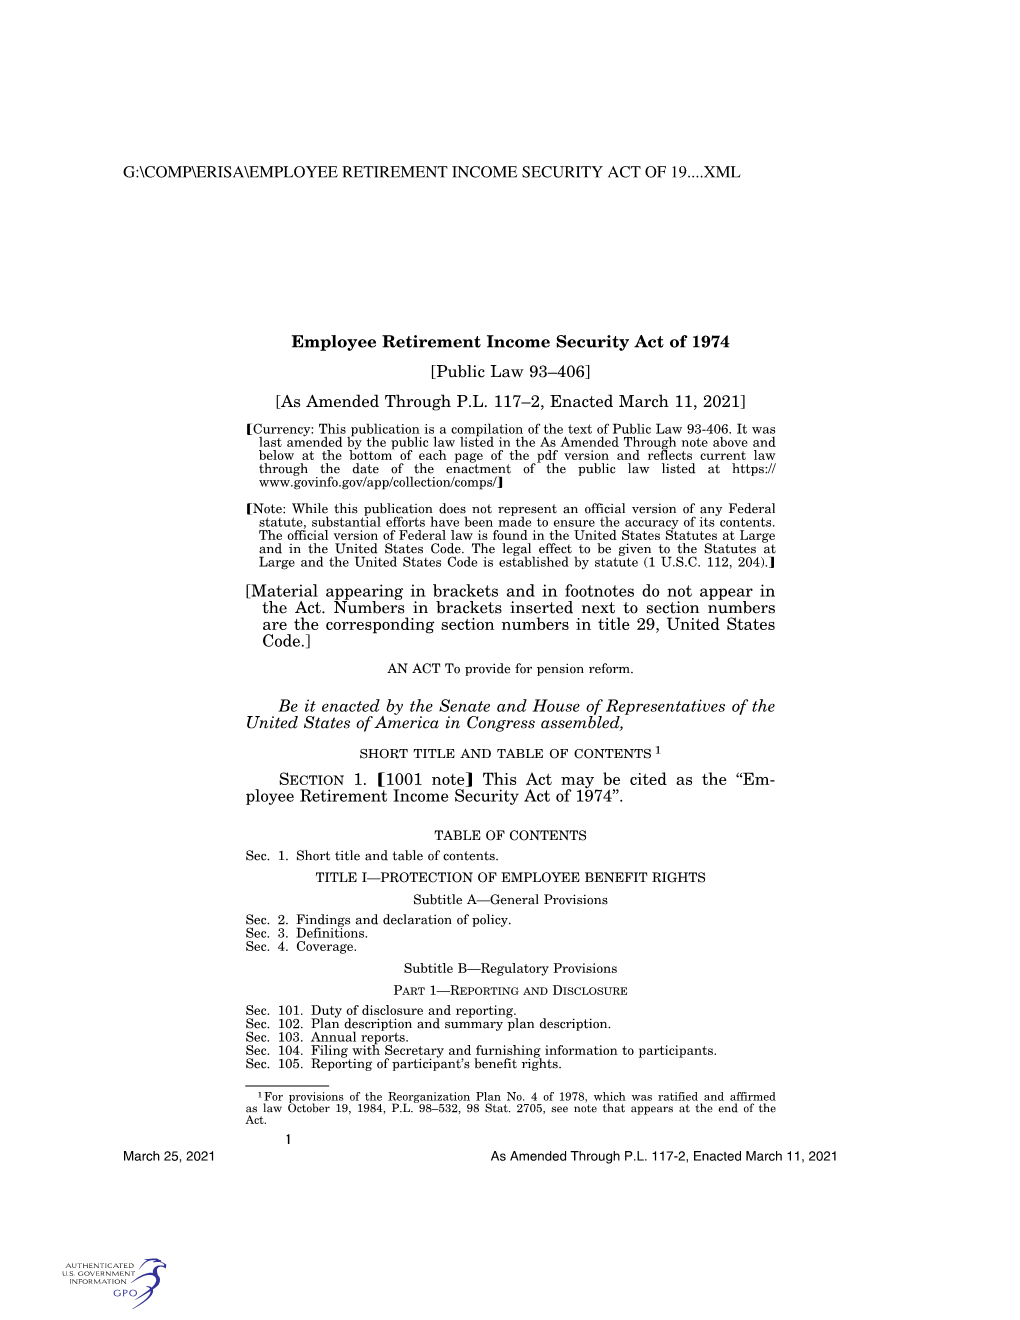 Employee Retirement Income Security Act of 1974 [Public Law 93–406] [As Amended Through P.L